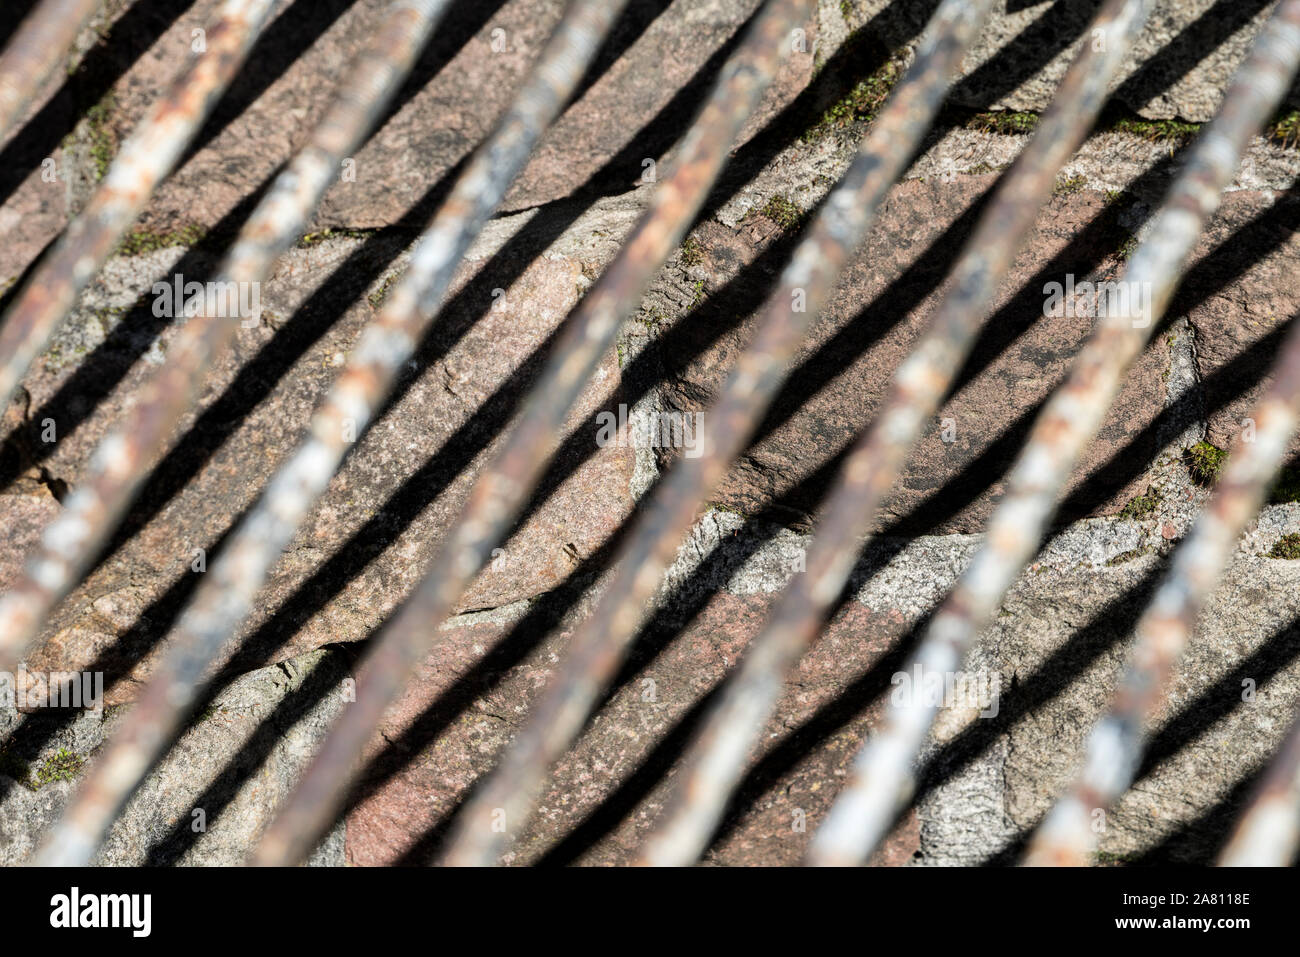 old rusty metal grid, metal structure Stock Photo